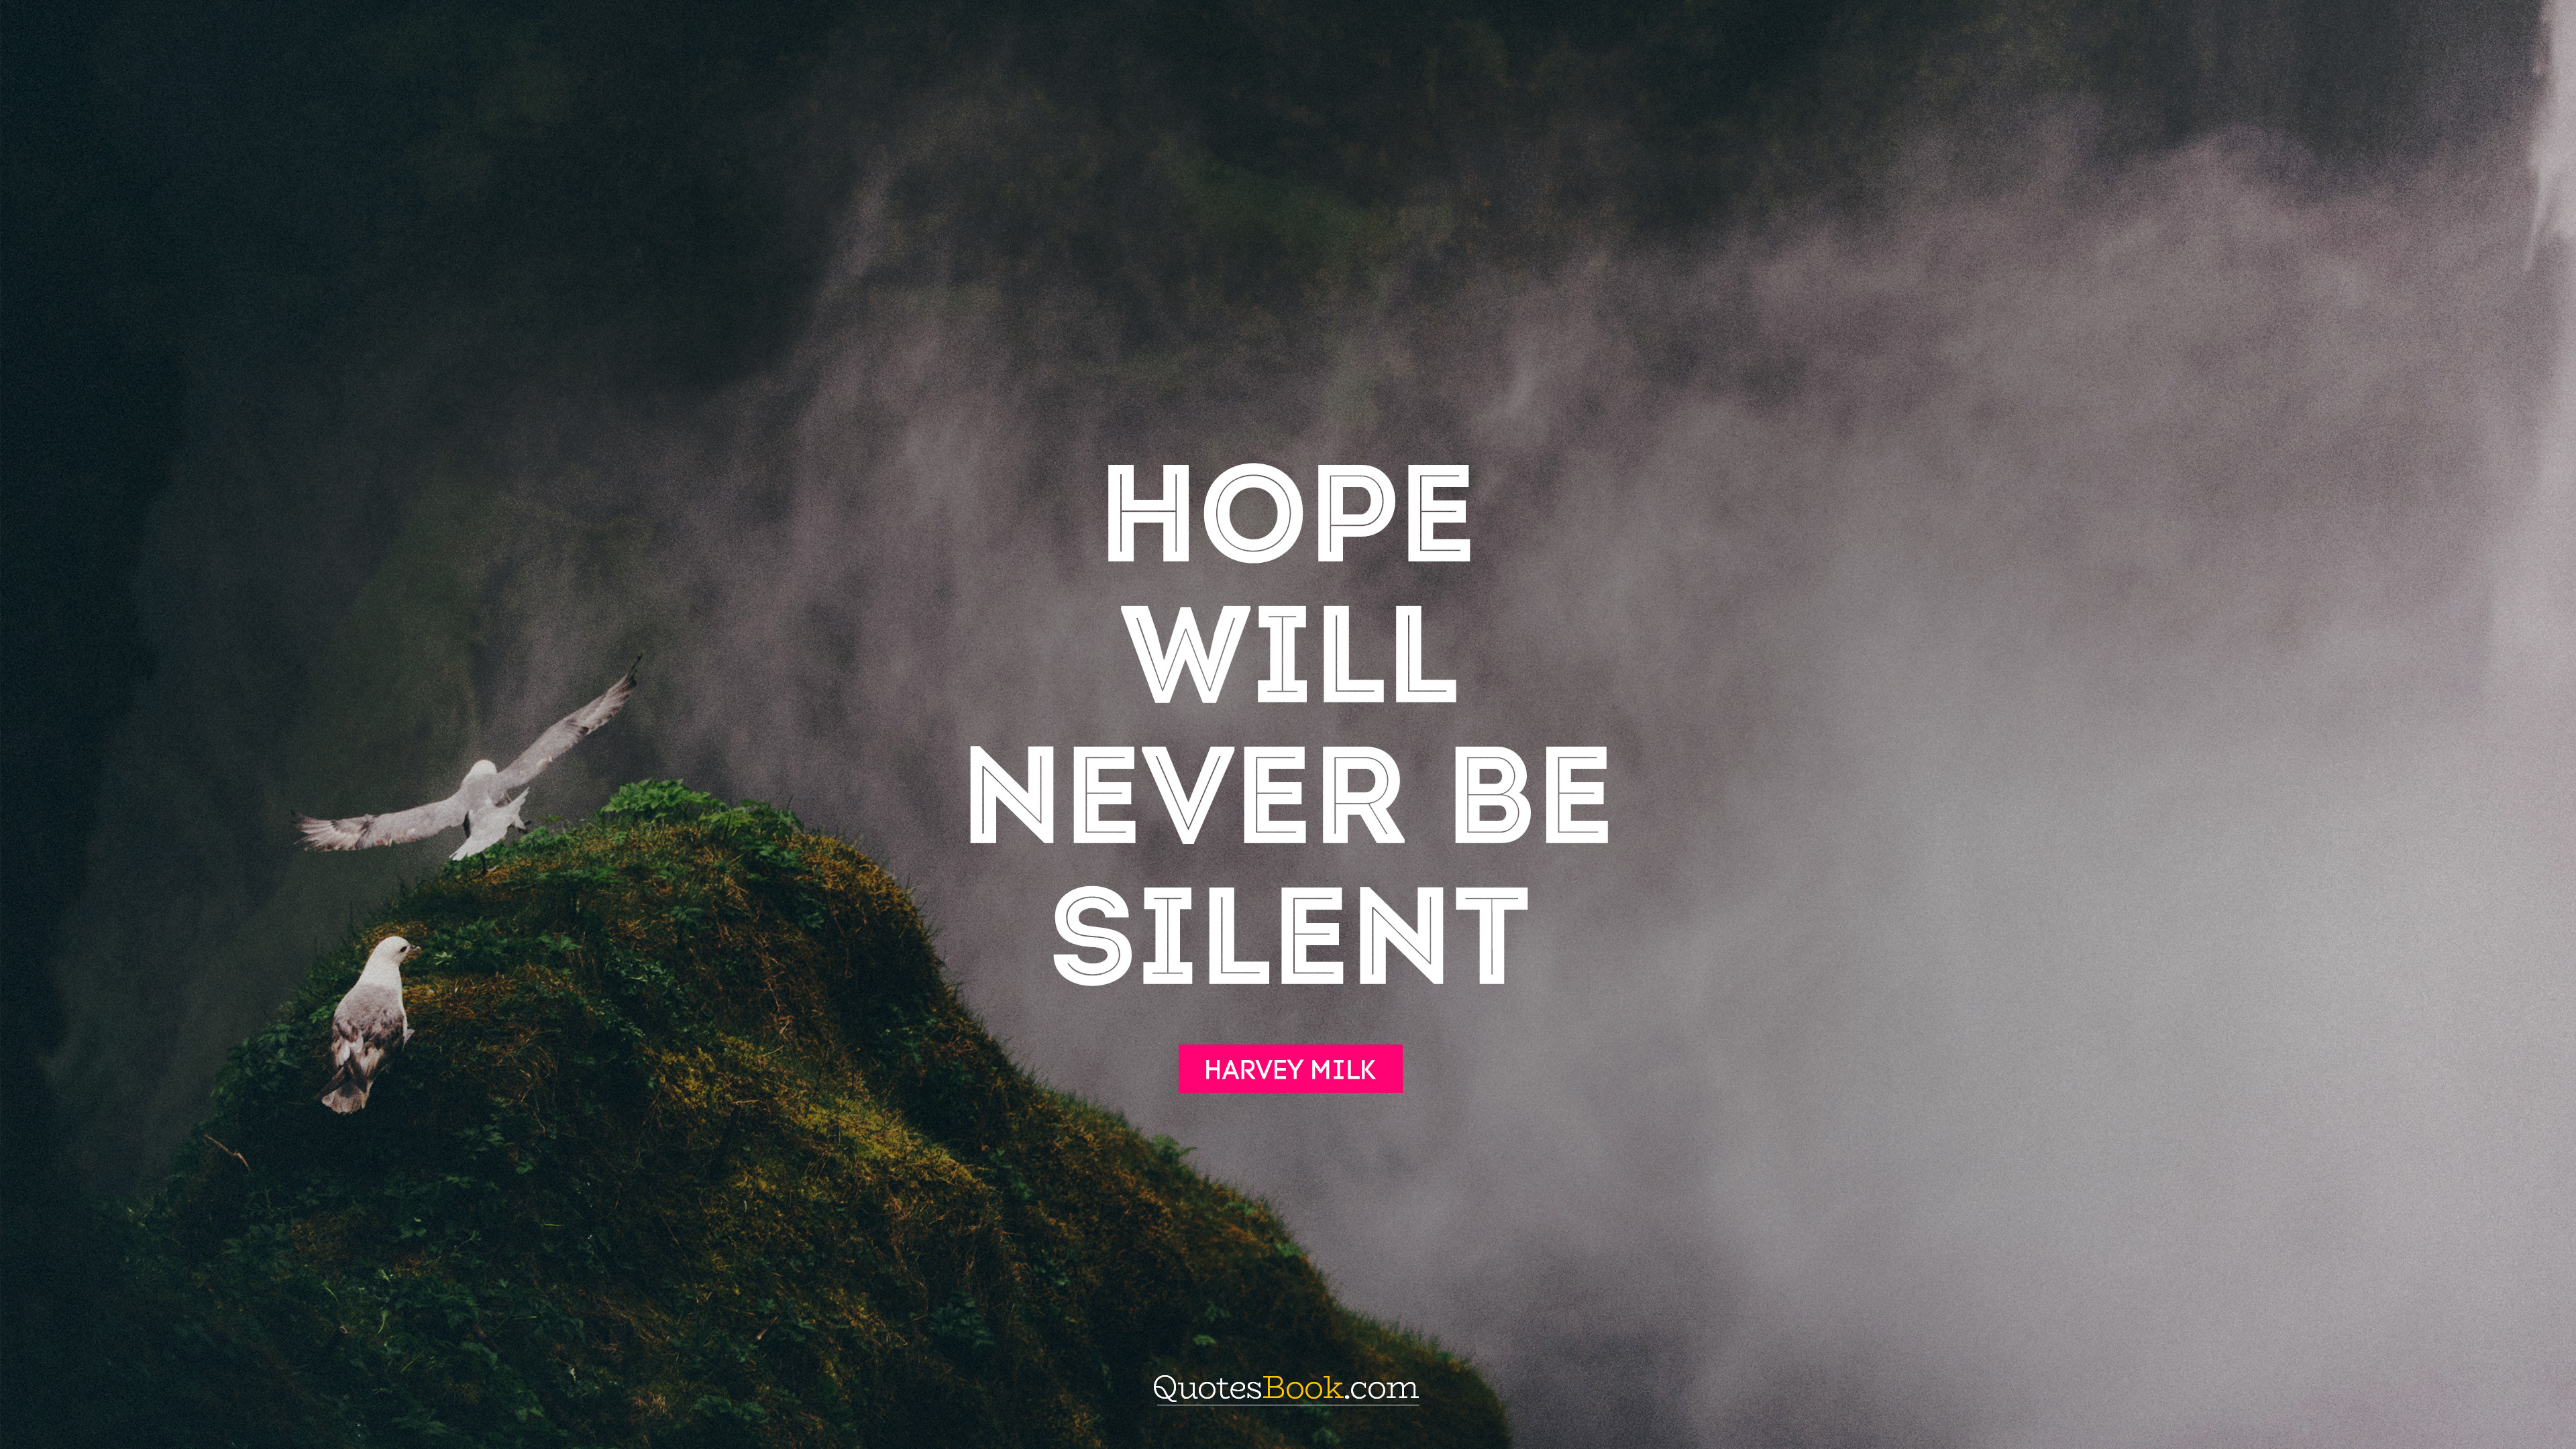 Переведи hope. Hope quotes. Is Silence. Shakespeare Silence quotes.